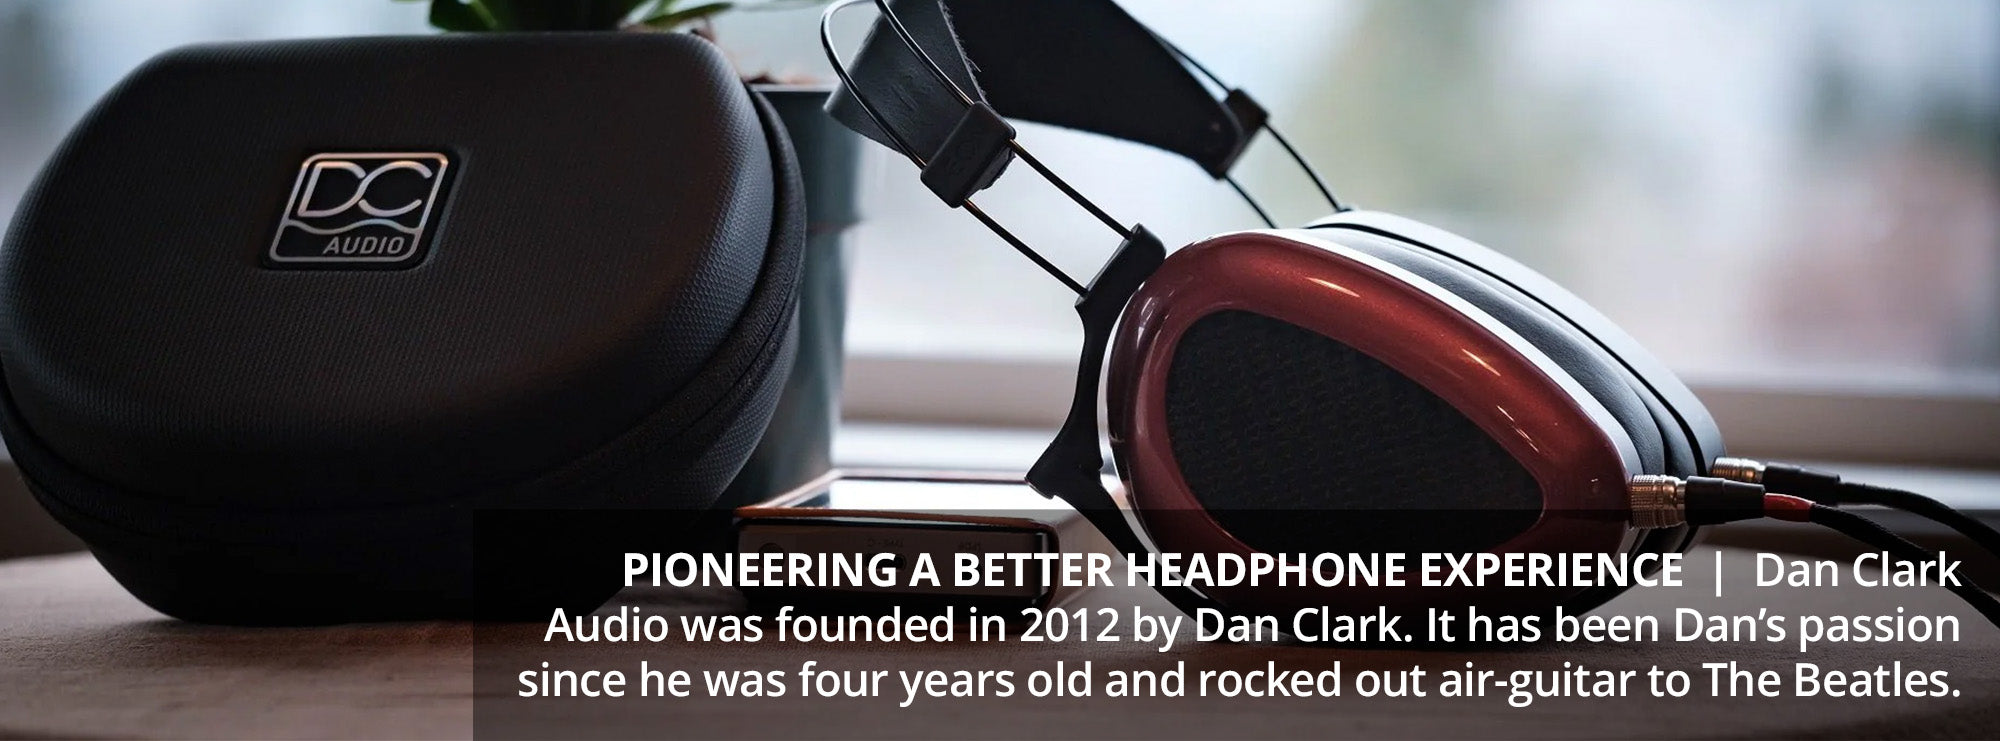 Pioneering a better headphone experience  Dan Clark Audio was founded in 2012 by Dan Clark. It has been Dan’s passion since he was four years old and rocked out air-guitar to The Beatles.